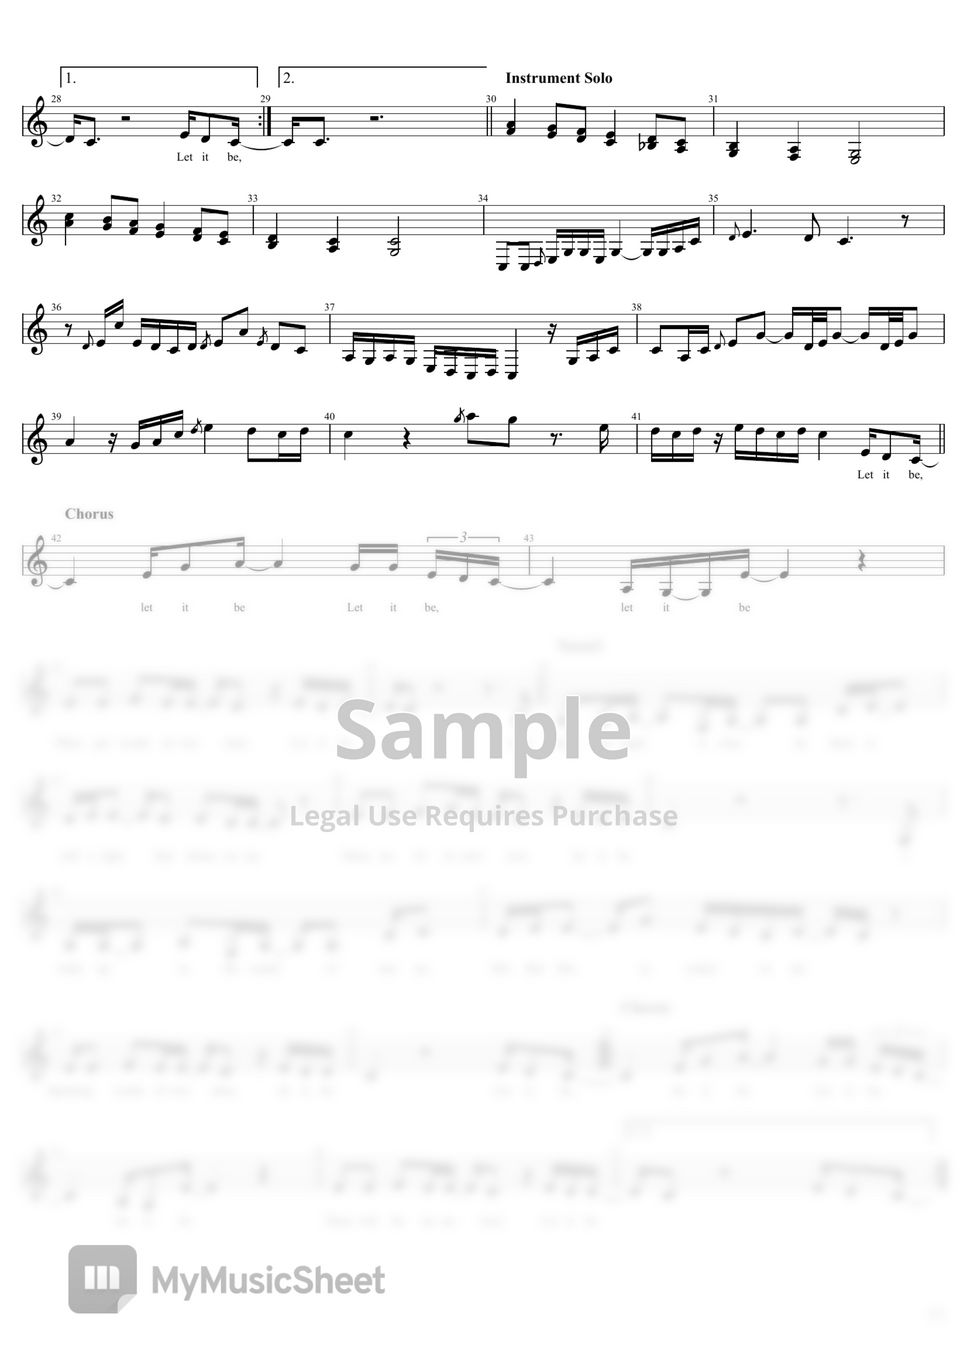 The Beatles - Let It Be (Score for "C Key" instruments) by EMST